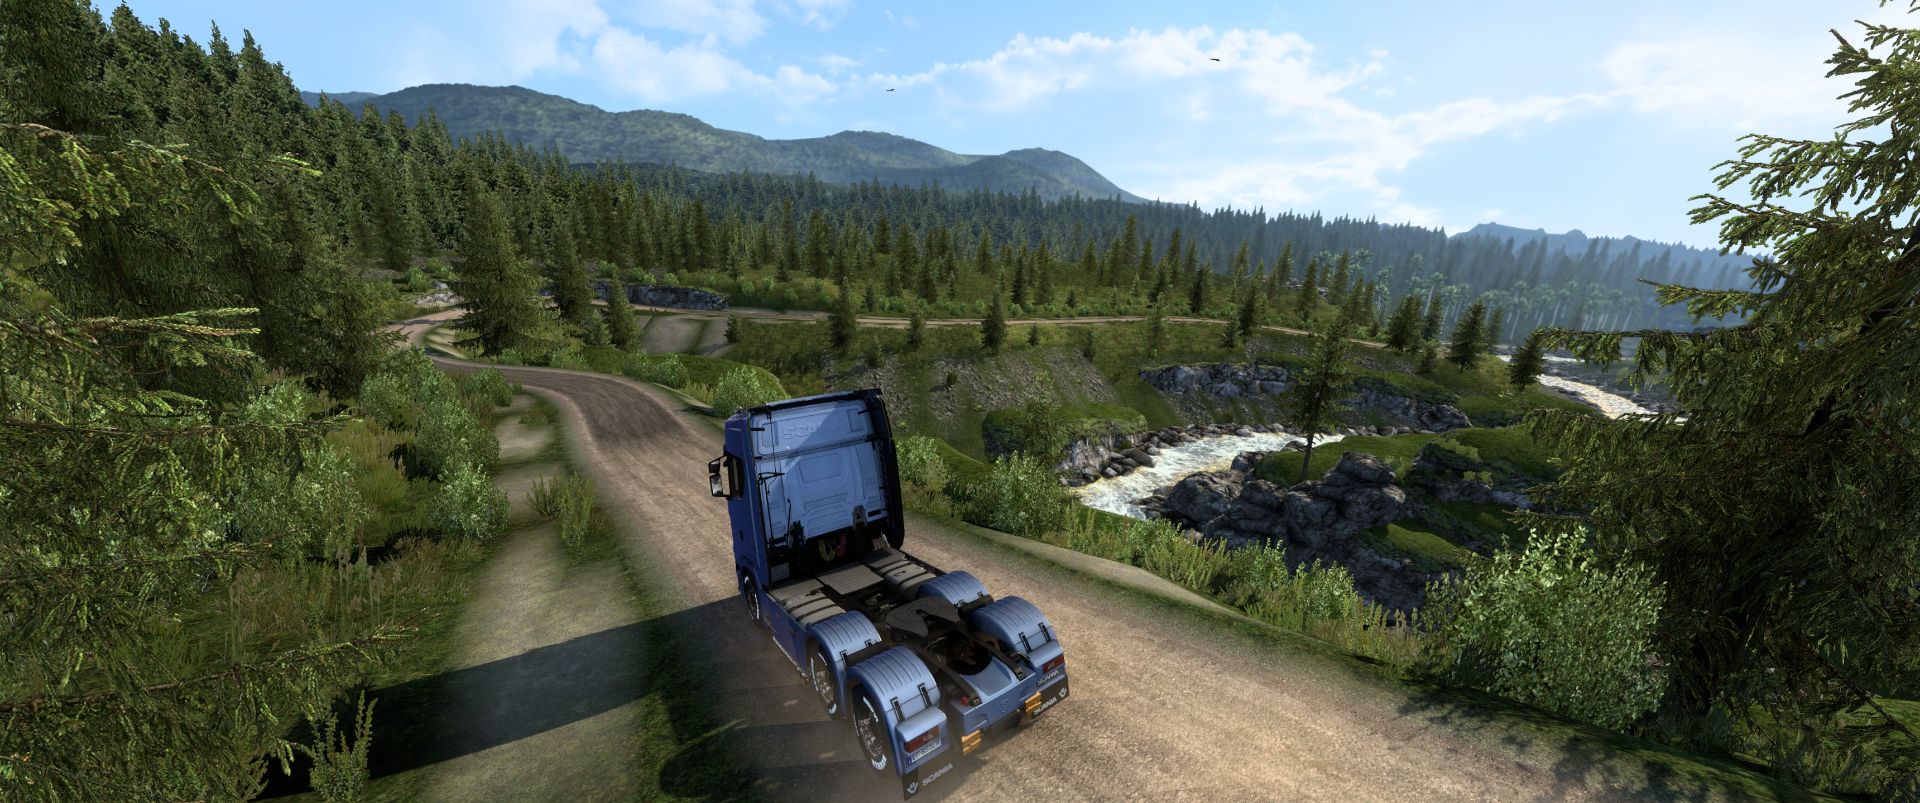 Euro Truck Simulator 2, The Most Boringly Fun Game In Existence - eTeknix